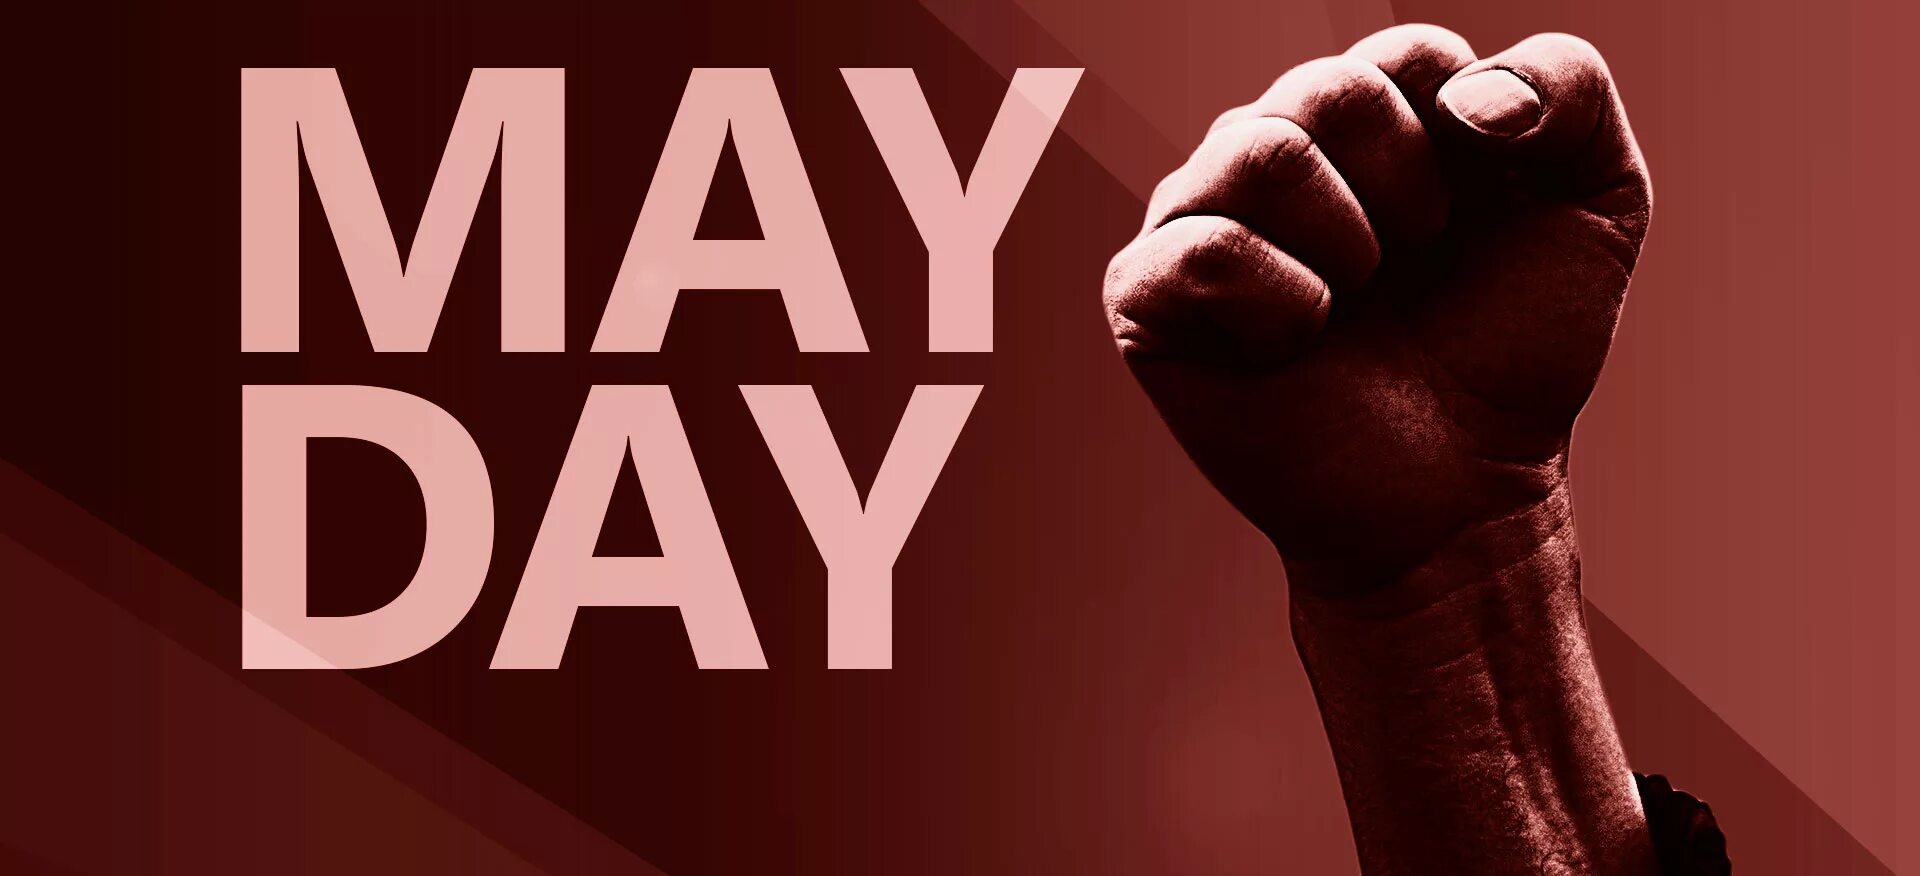 First may day. May Day. Лабор дей. 1 May Day. Мэй Дэй картинки.